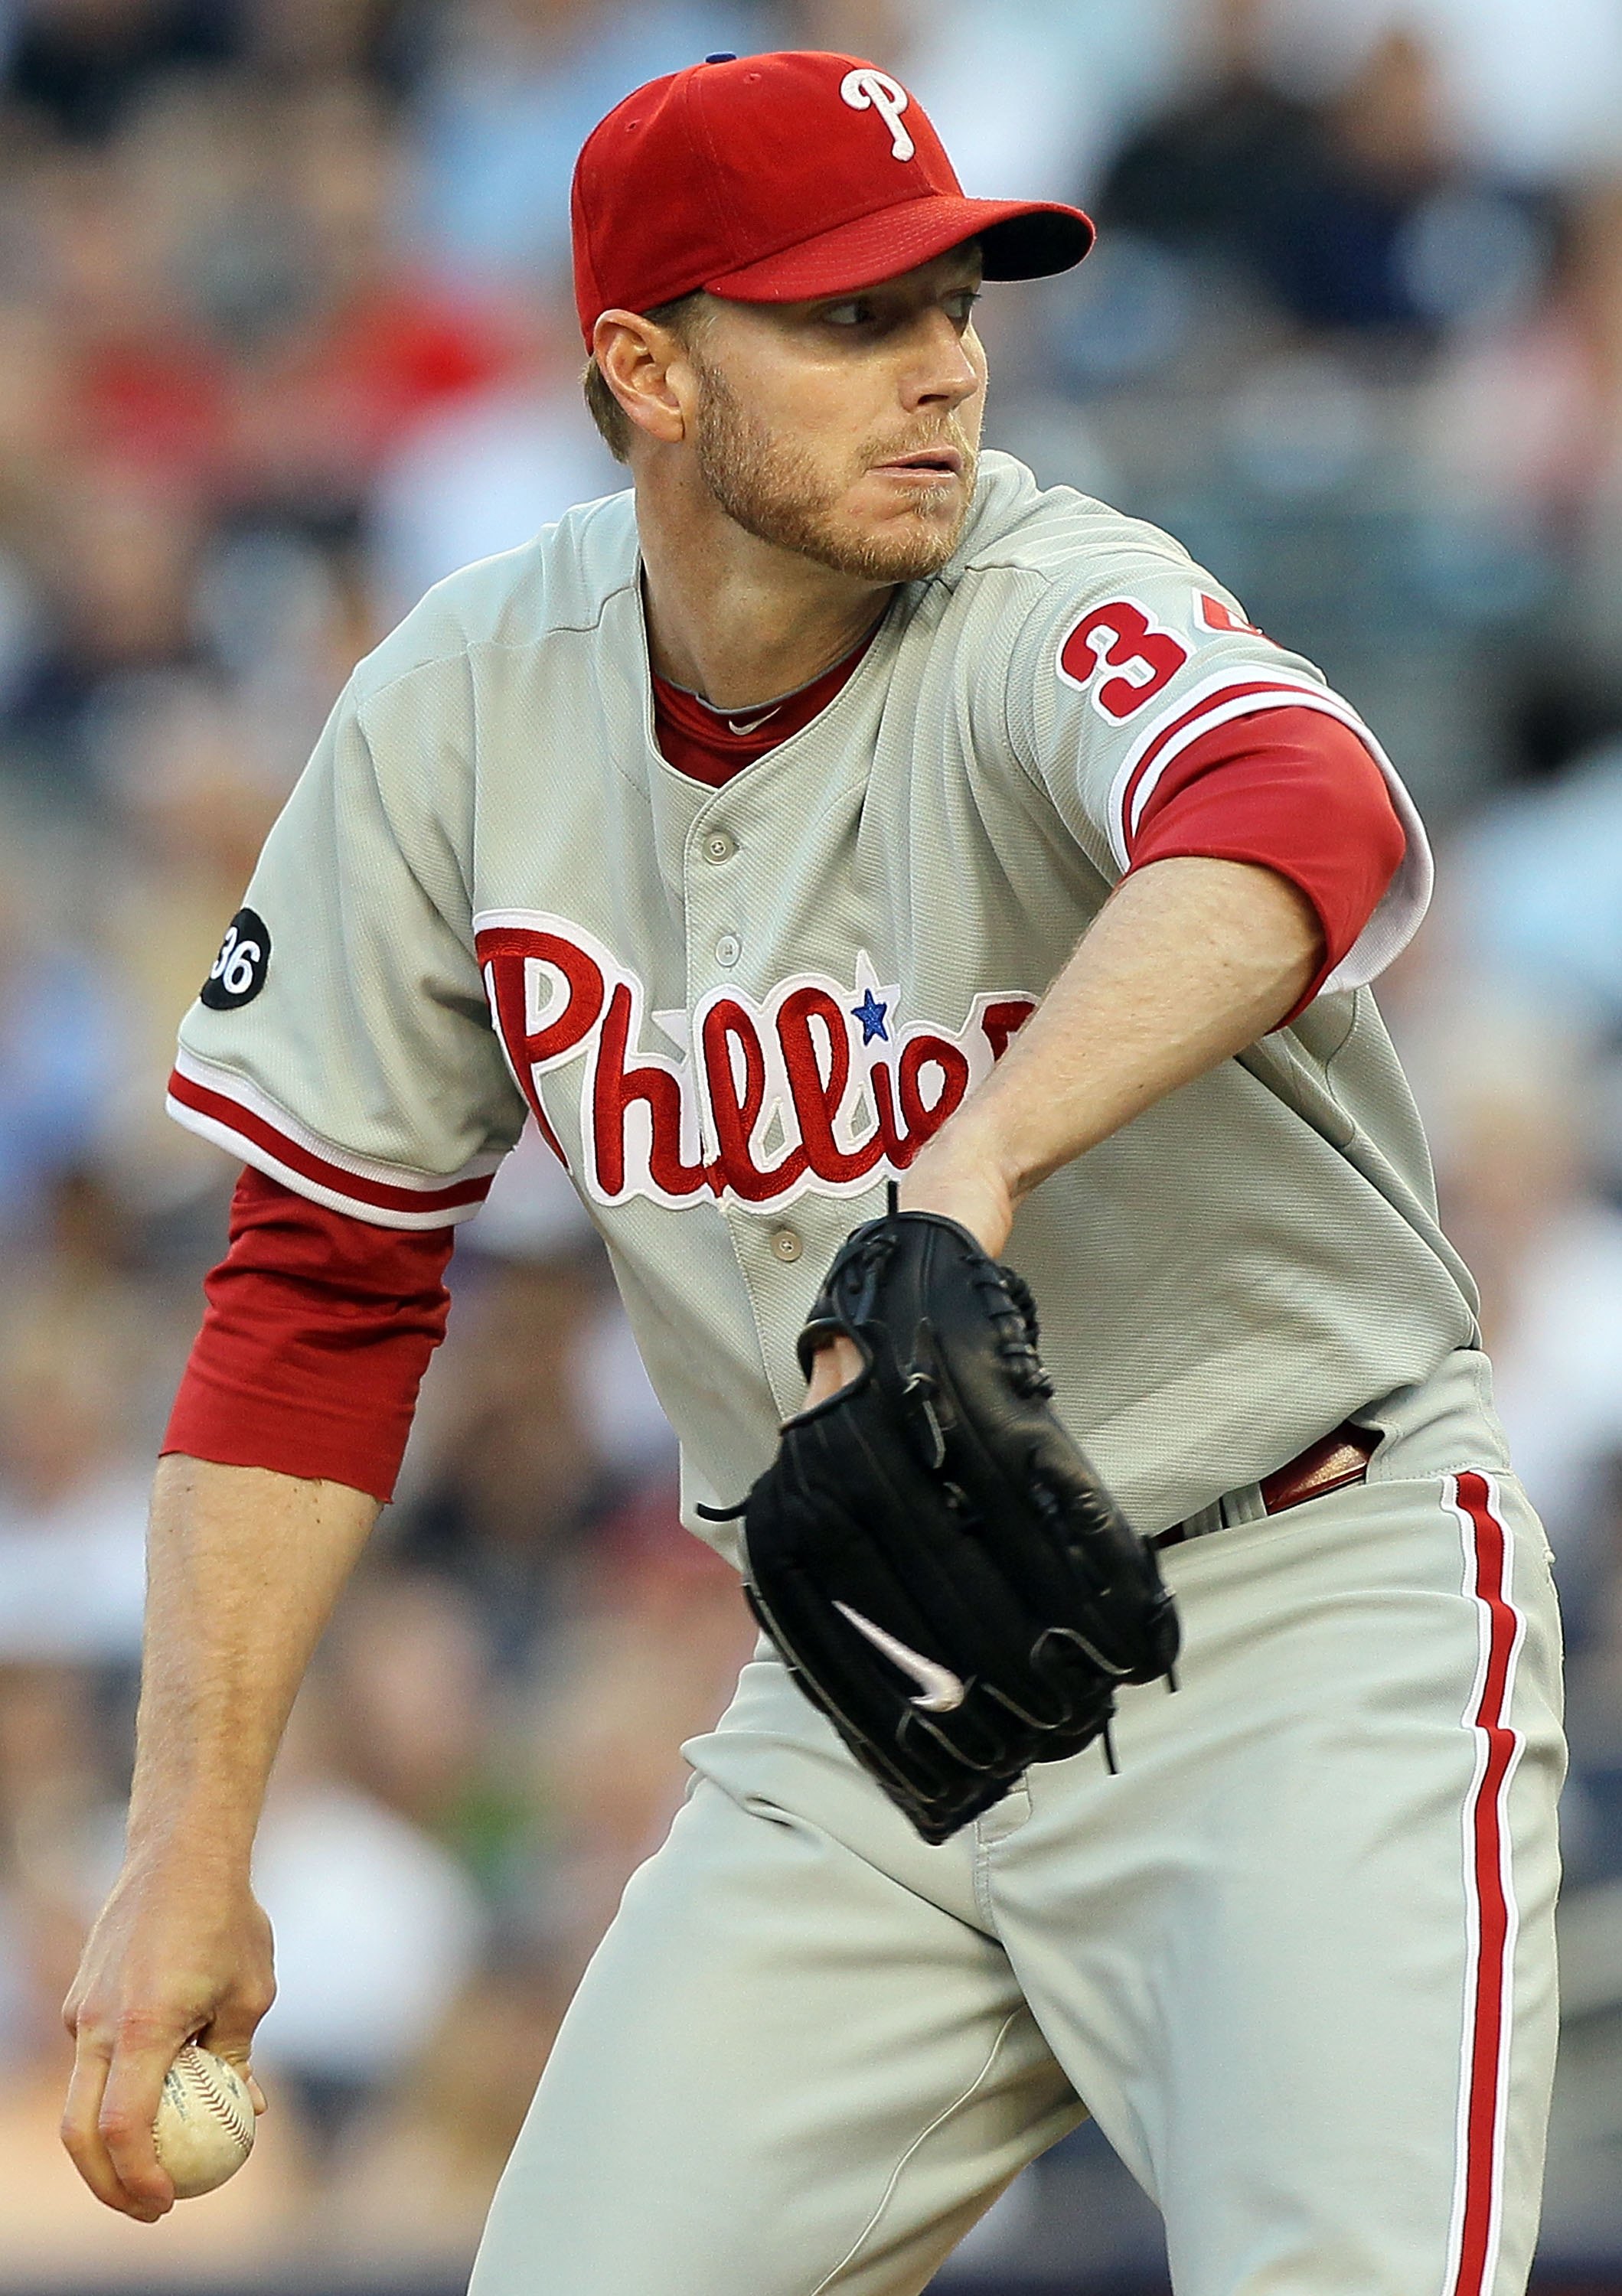 NEW YORK - JUNE 15:  Roy Halladay #34 of the Philadelphia Phillies delivers a pitch against the New York Yankees on June 15, 2010 at Yankee Stadium in the Bronx borough of New York City.  (Photo by Jim McIsaac/Getty Images)